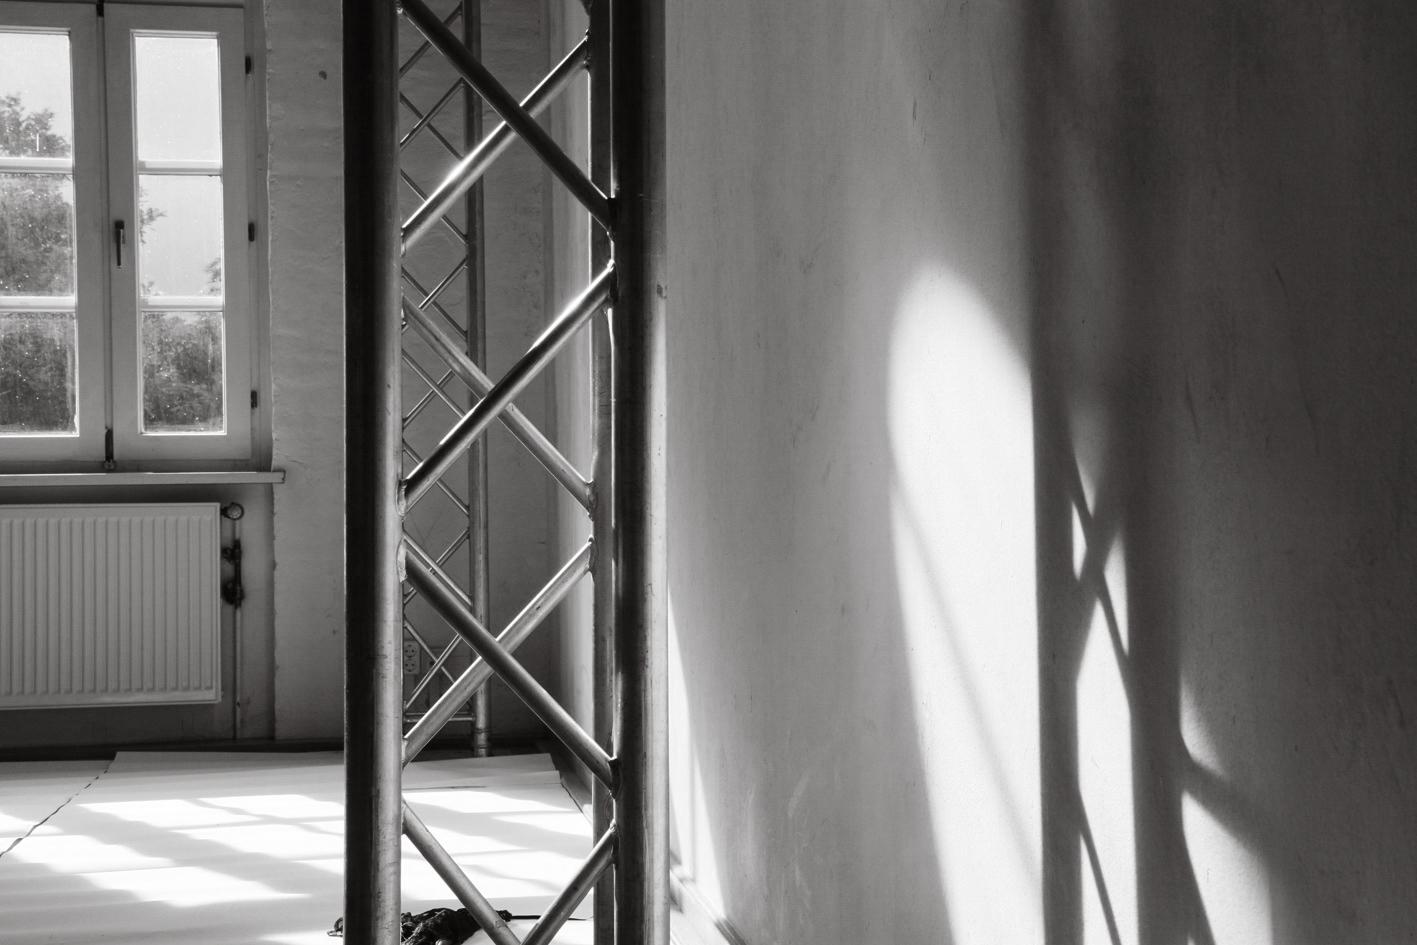 Afternoon sun shines through an altbau window and gleams off of metal trusses in the front of the frame, casting soft shadows onto the wall. The image is black and white.